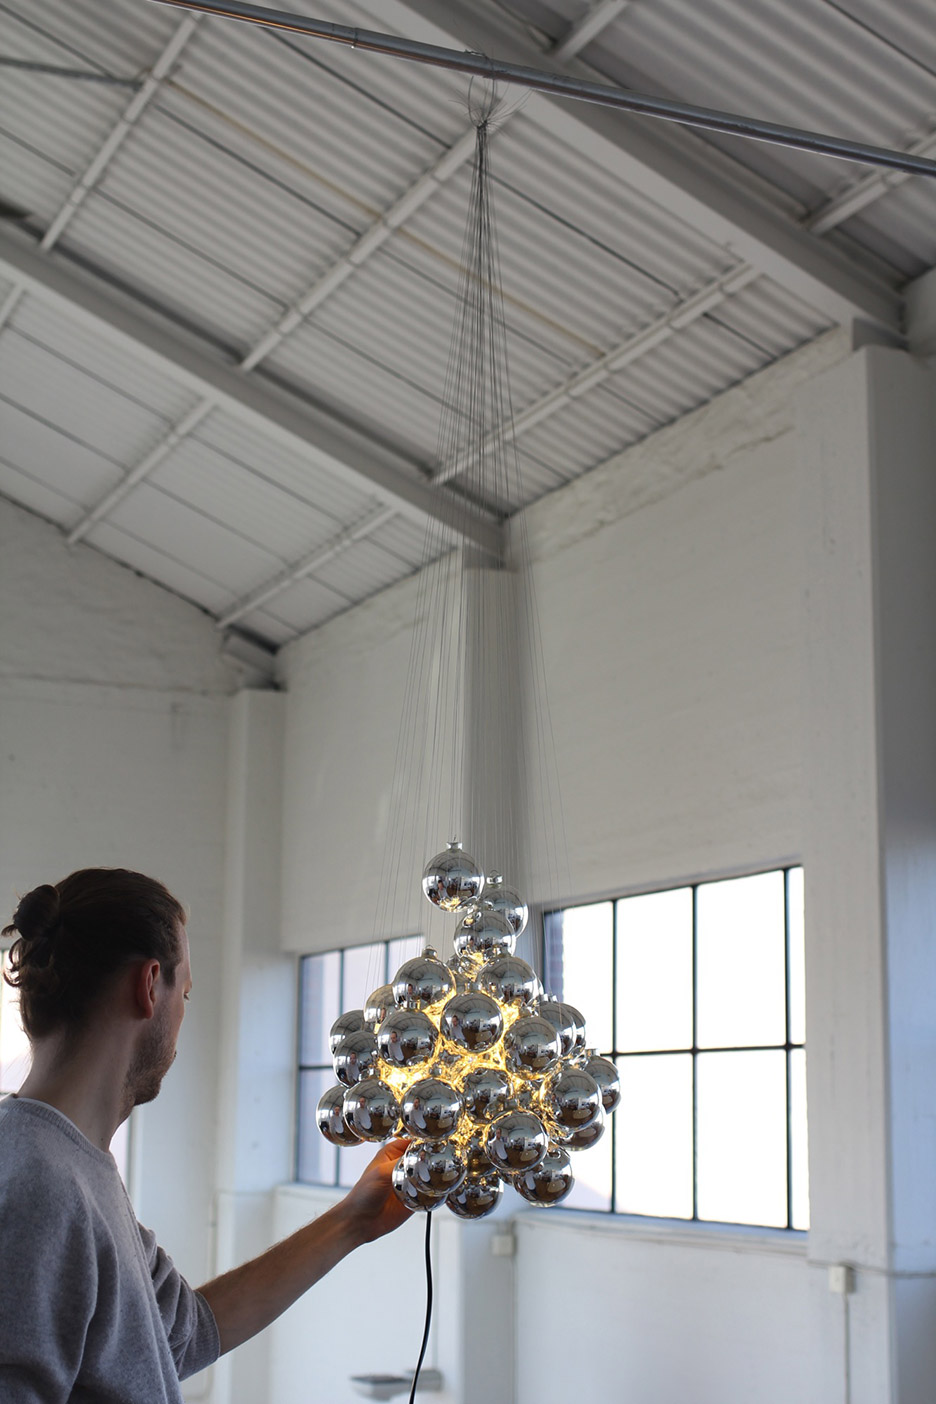 Daniel Rybakken stands with his Stochastic lamp for Luceplan